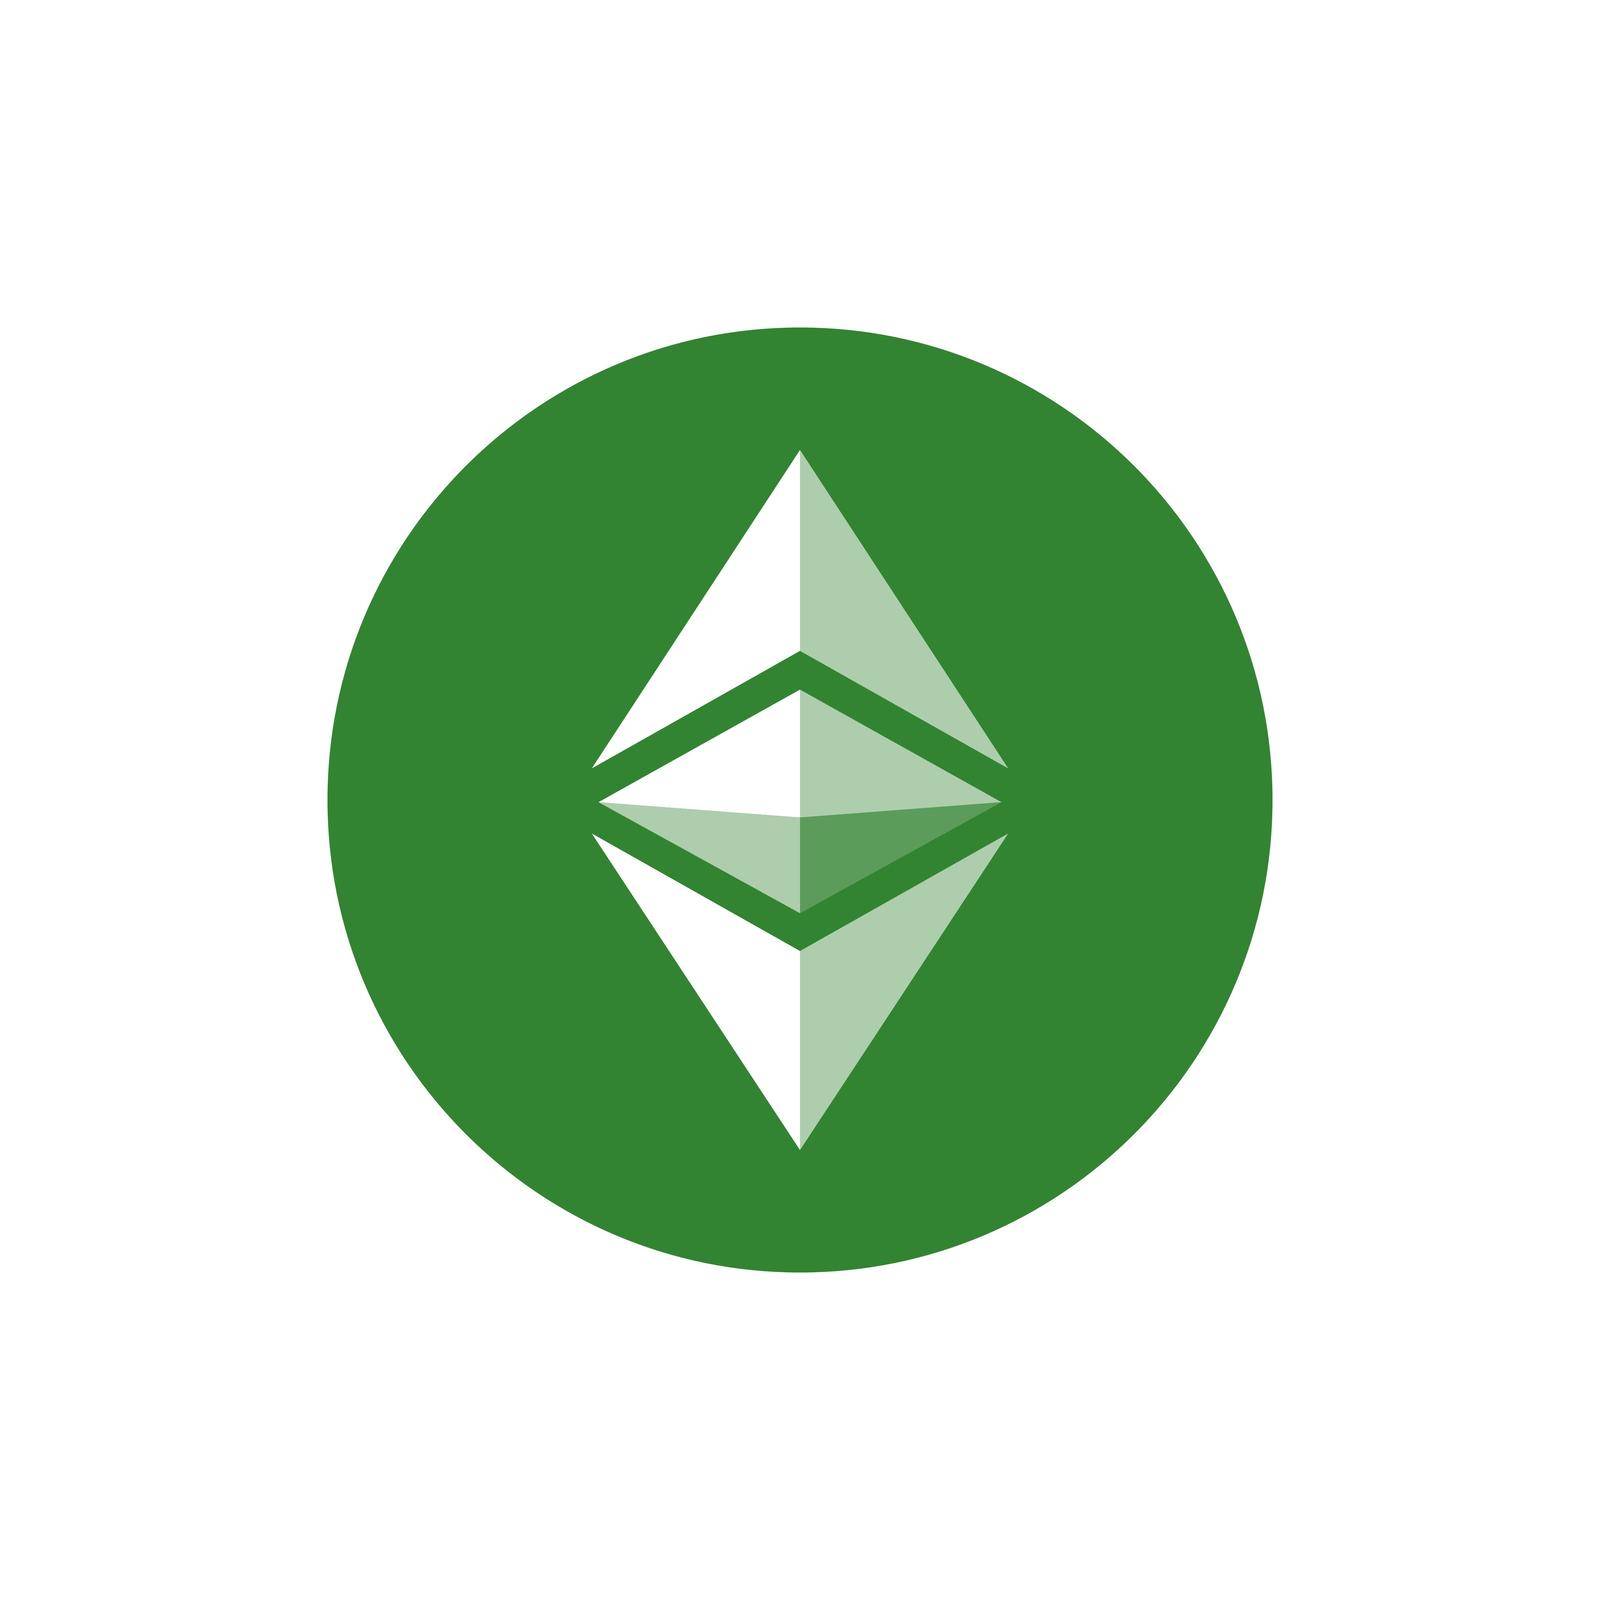 Ethereum Classic coin icon isolated on white background. ETC crypto currency vector.